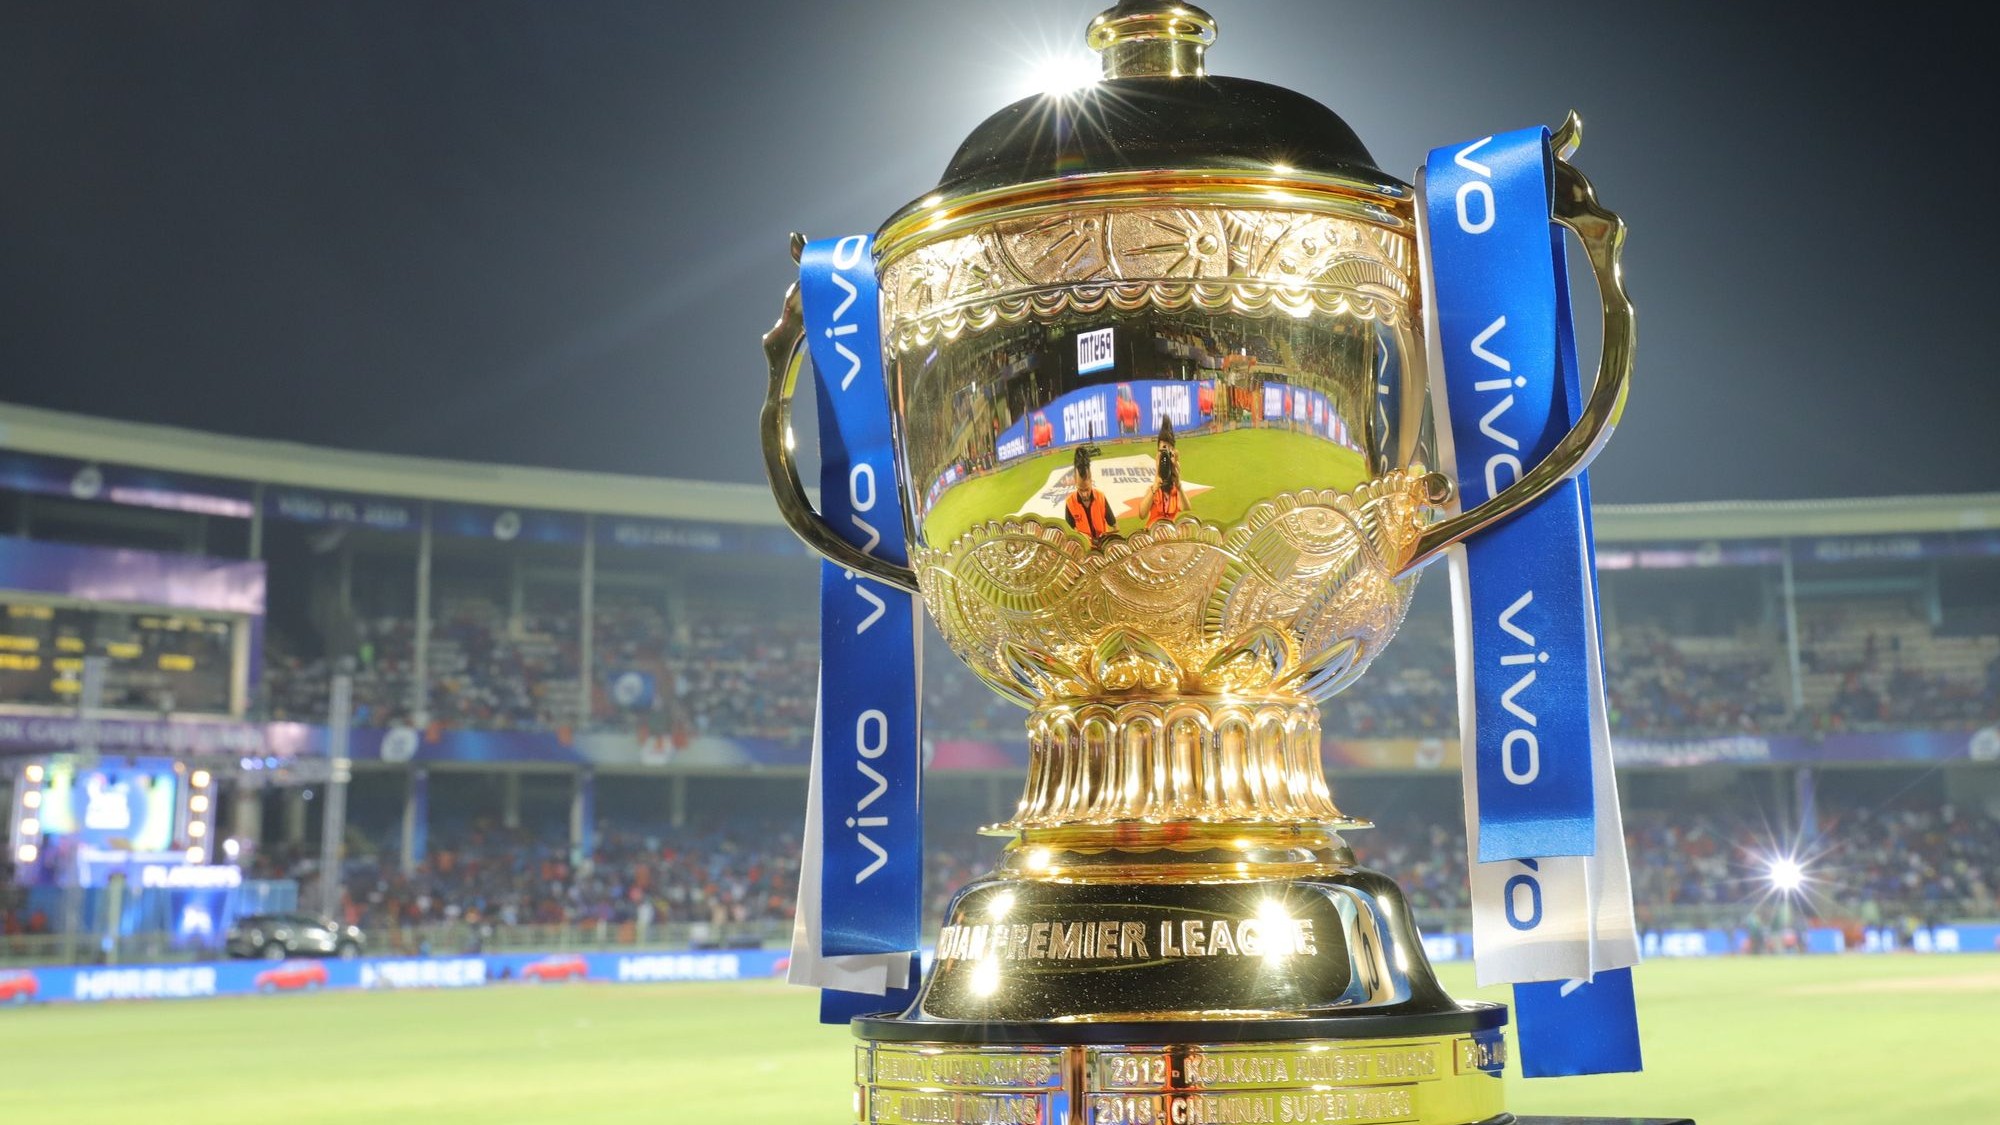 IPL 2020 may start from September 19; matches may begin at 7.30 pm: Reports